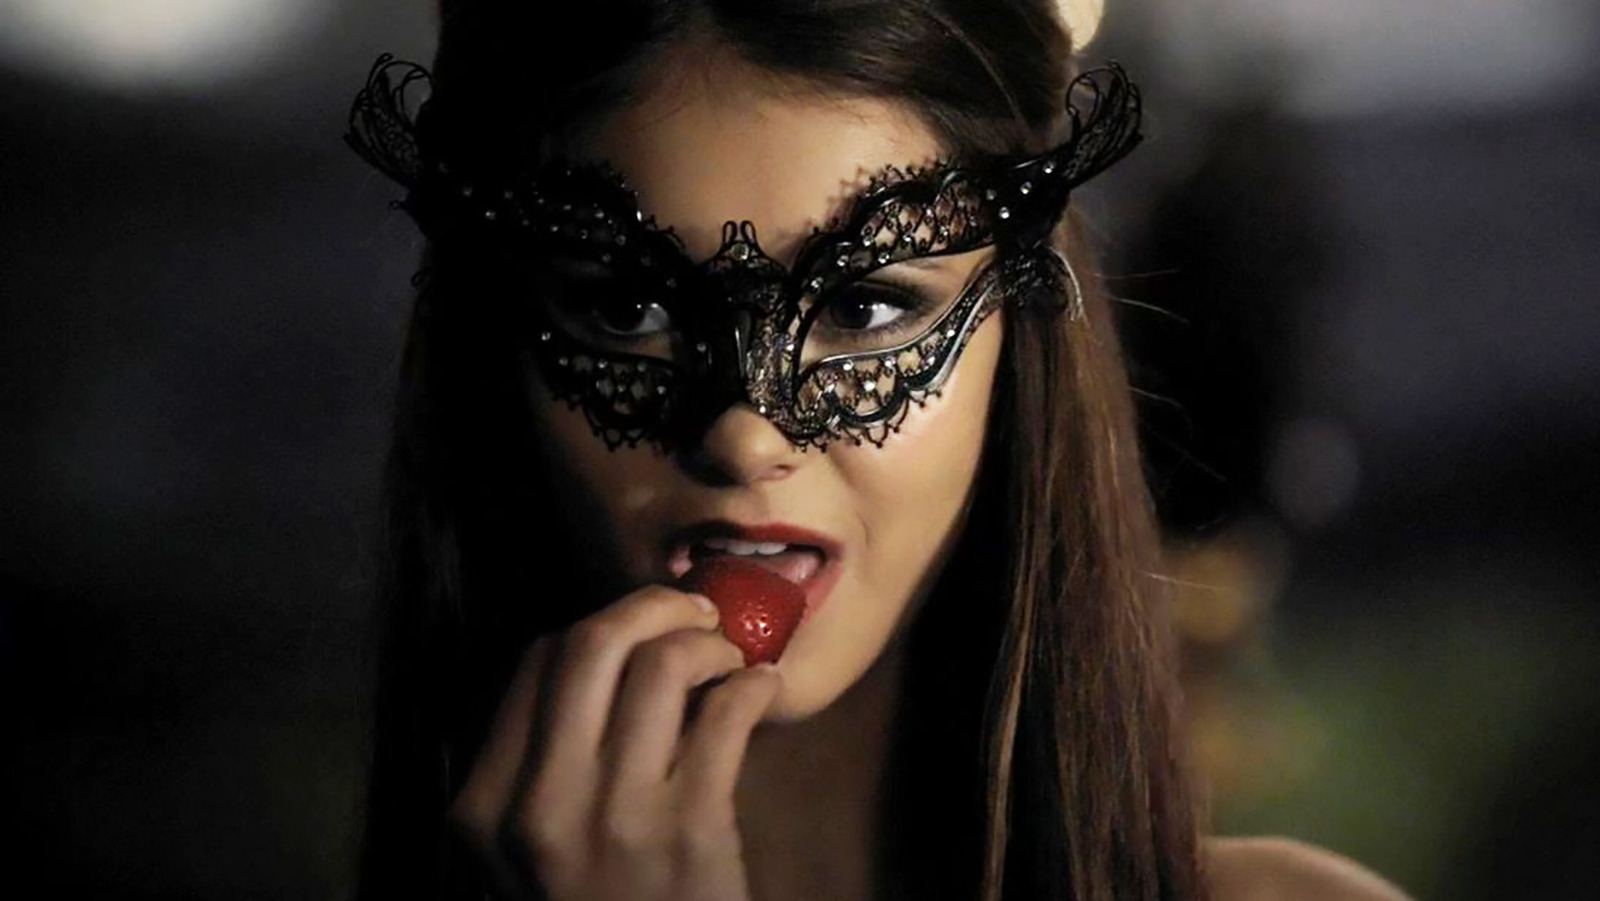 Stefan and Katherine Masquerade, I just loved this picture …